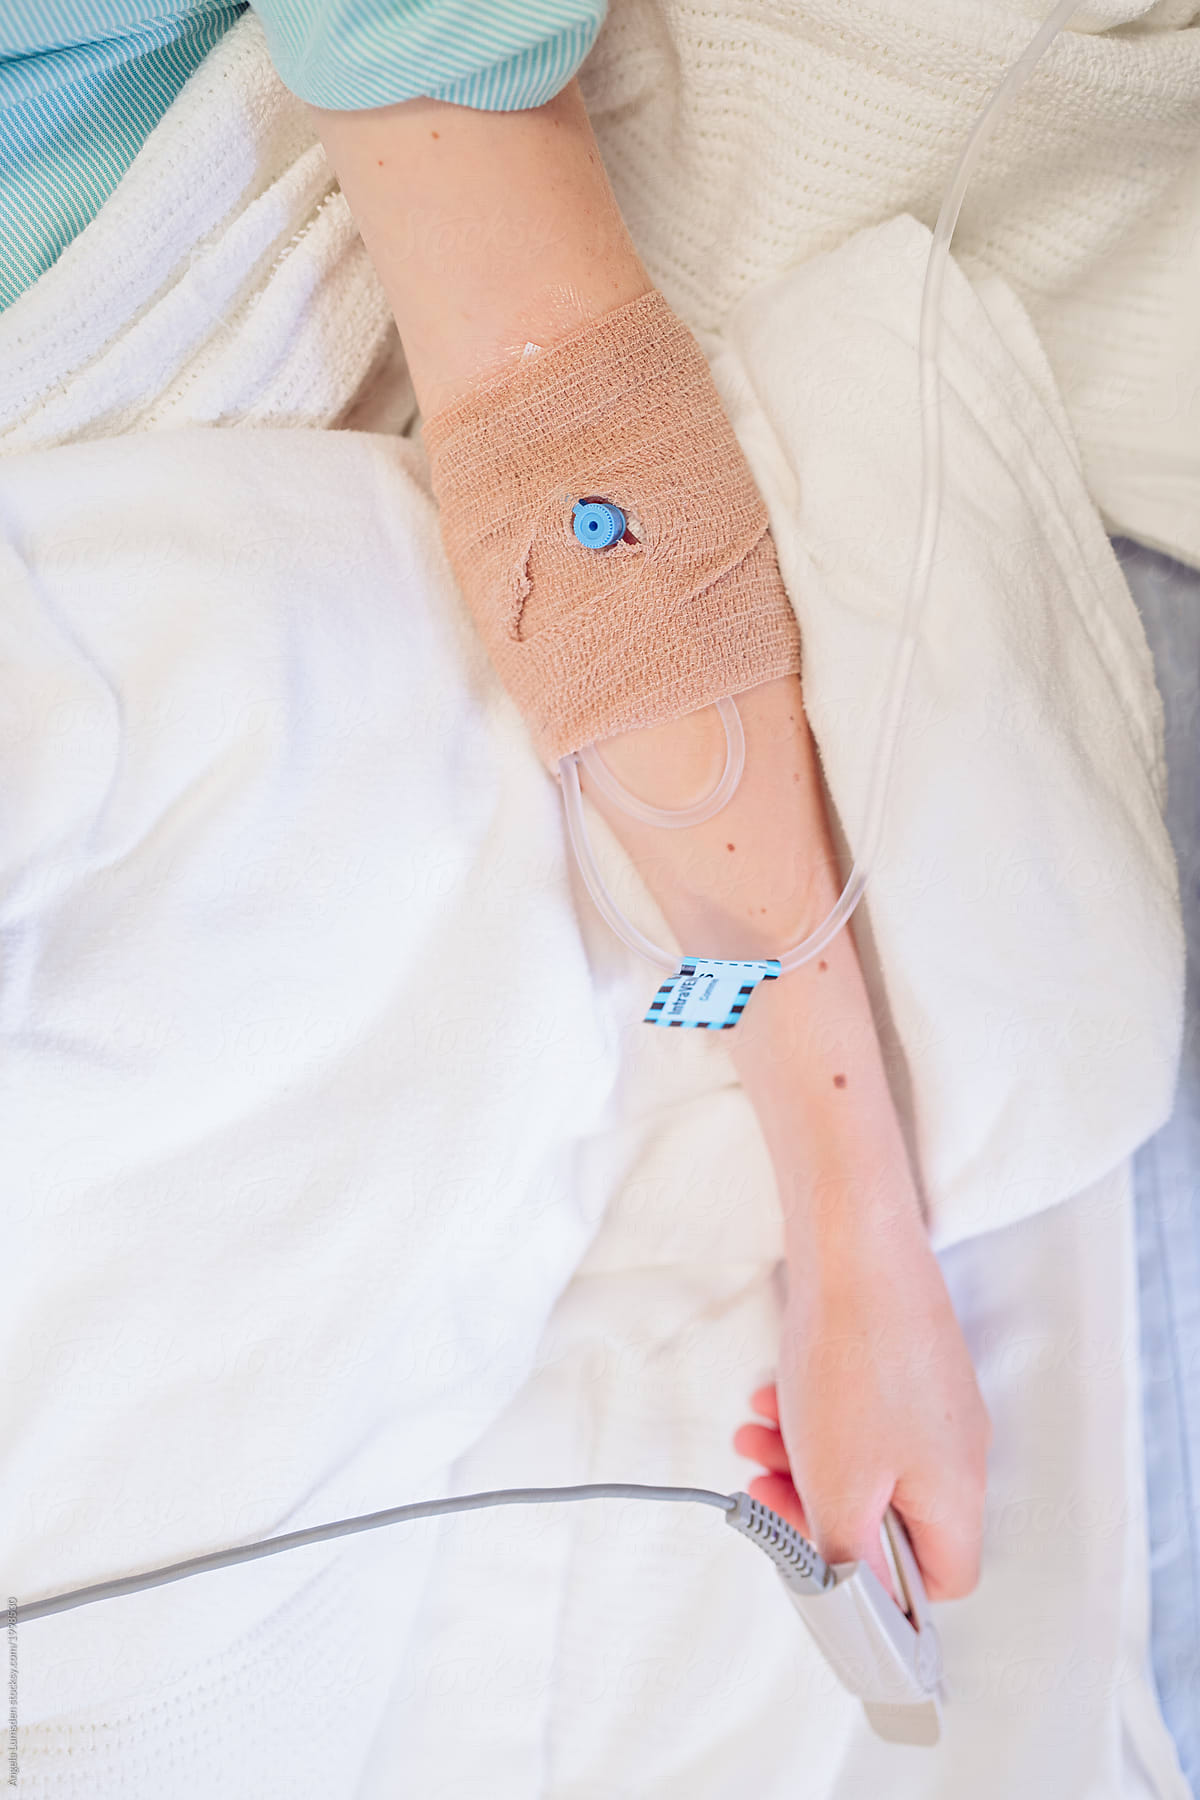 Child in a hospital bed with an intravenous cannula in his arm